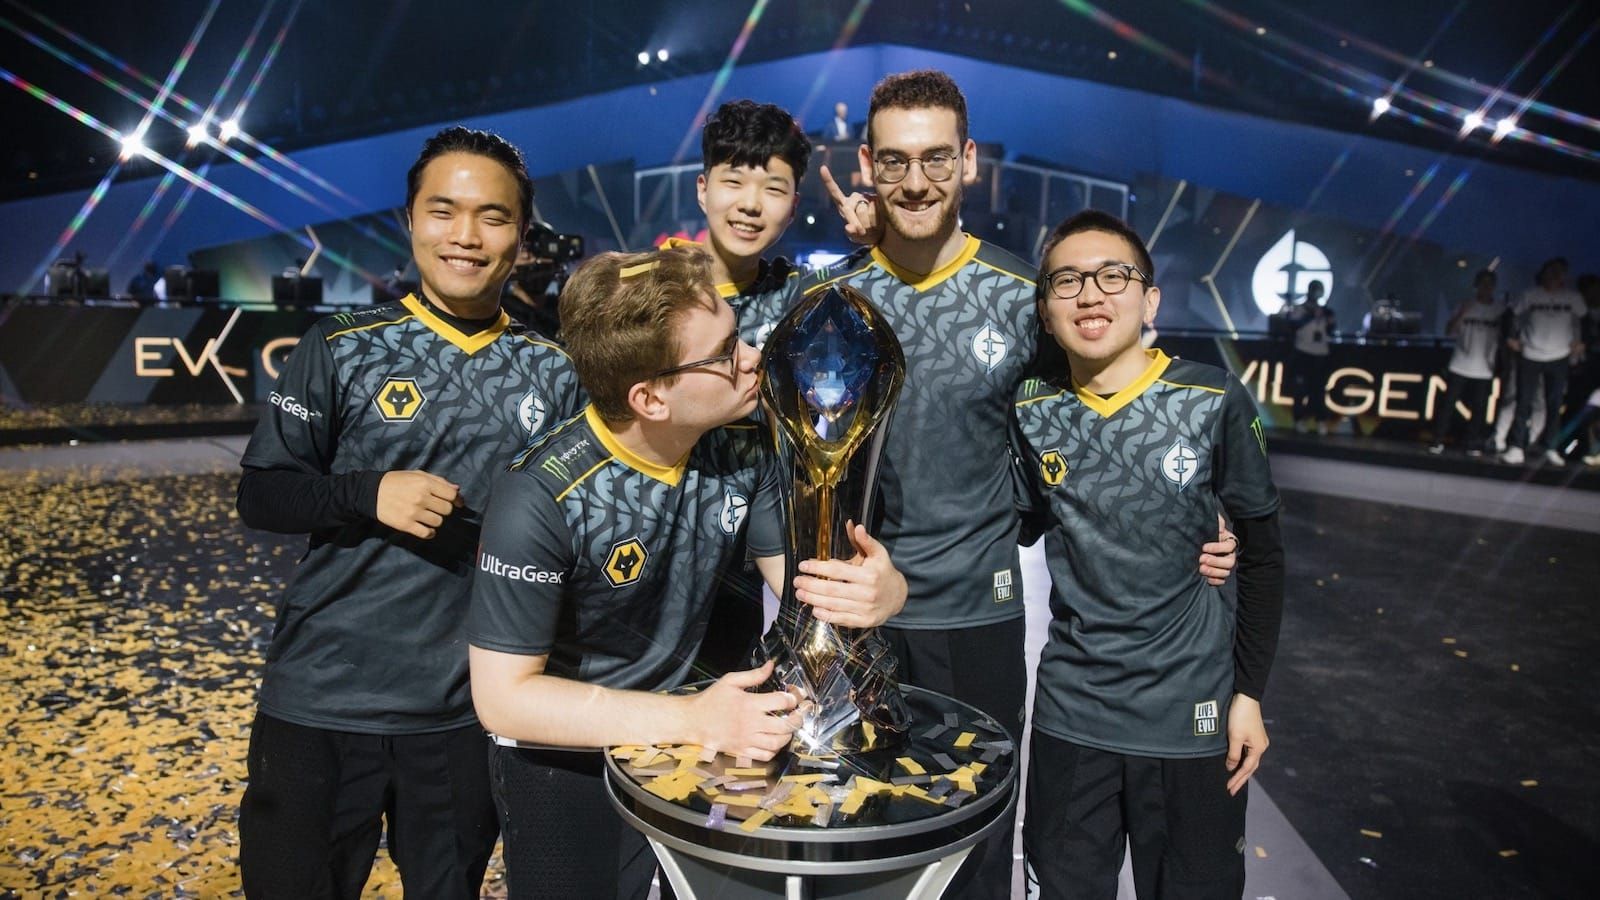 Evil Geniuses League of Legends team poses on stage with the LCS spring championship trophy